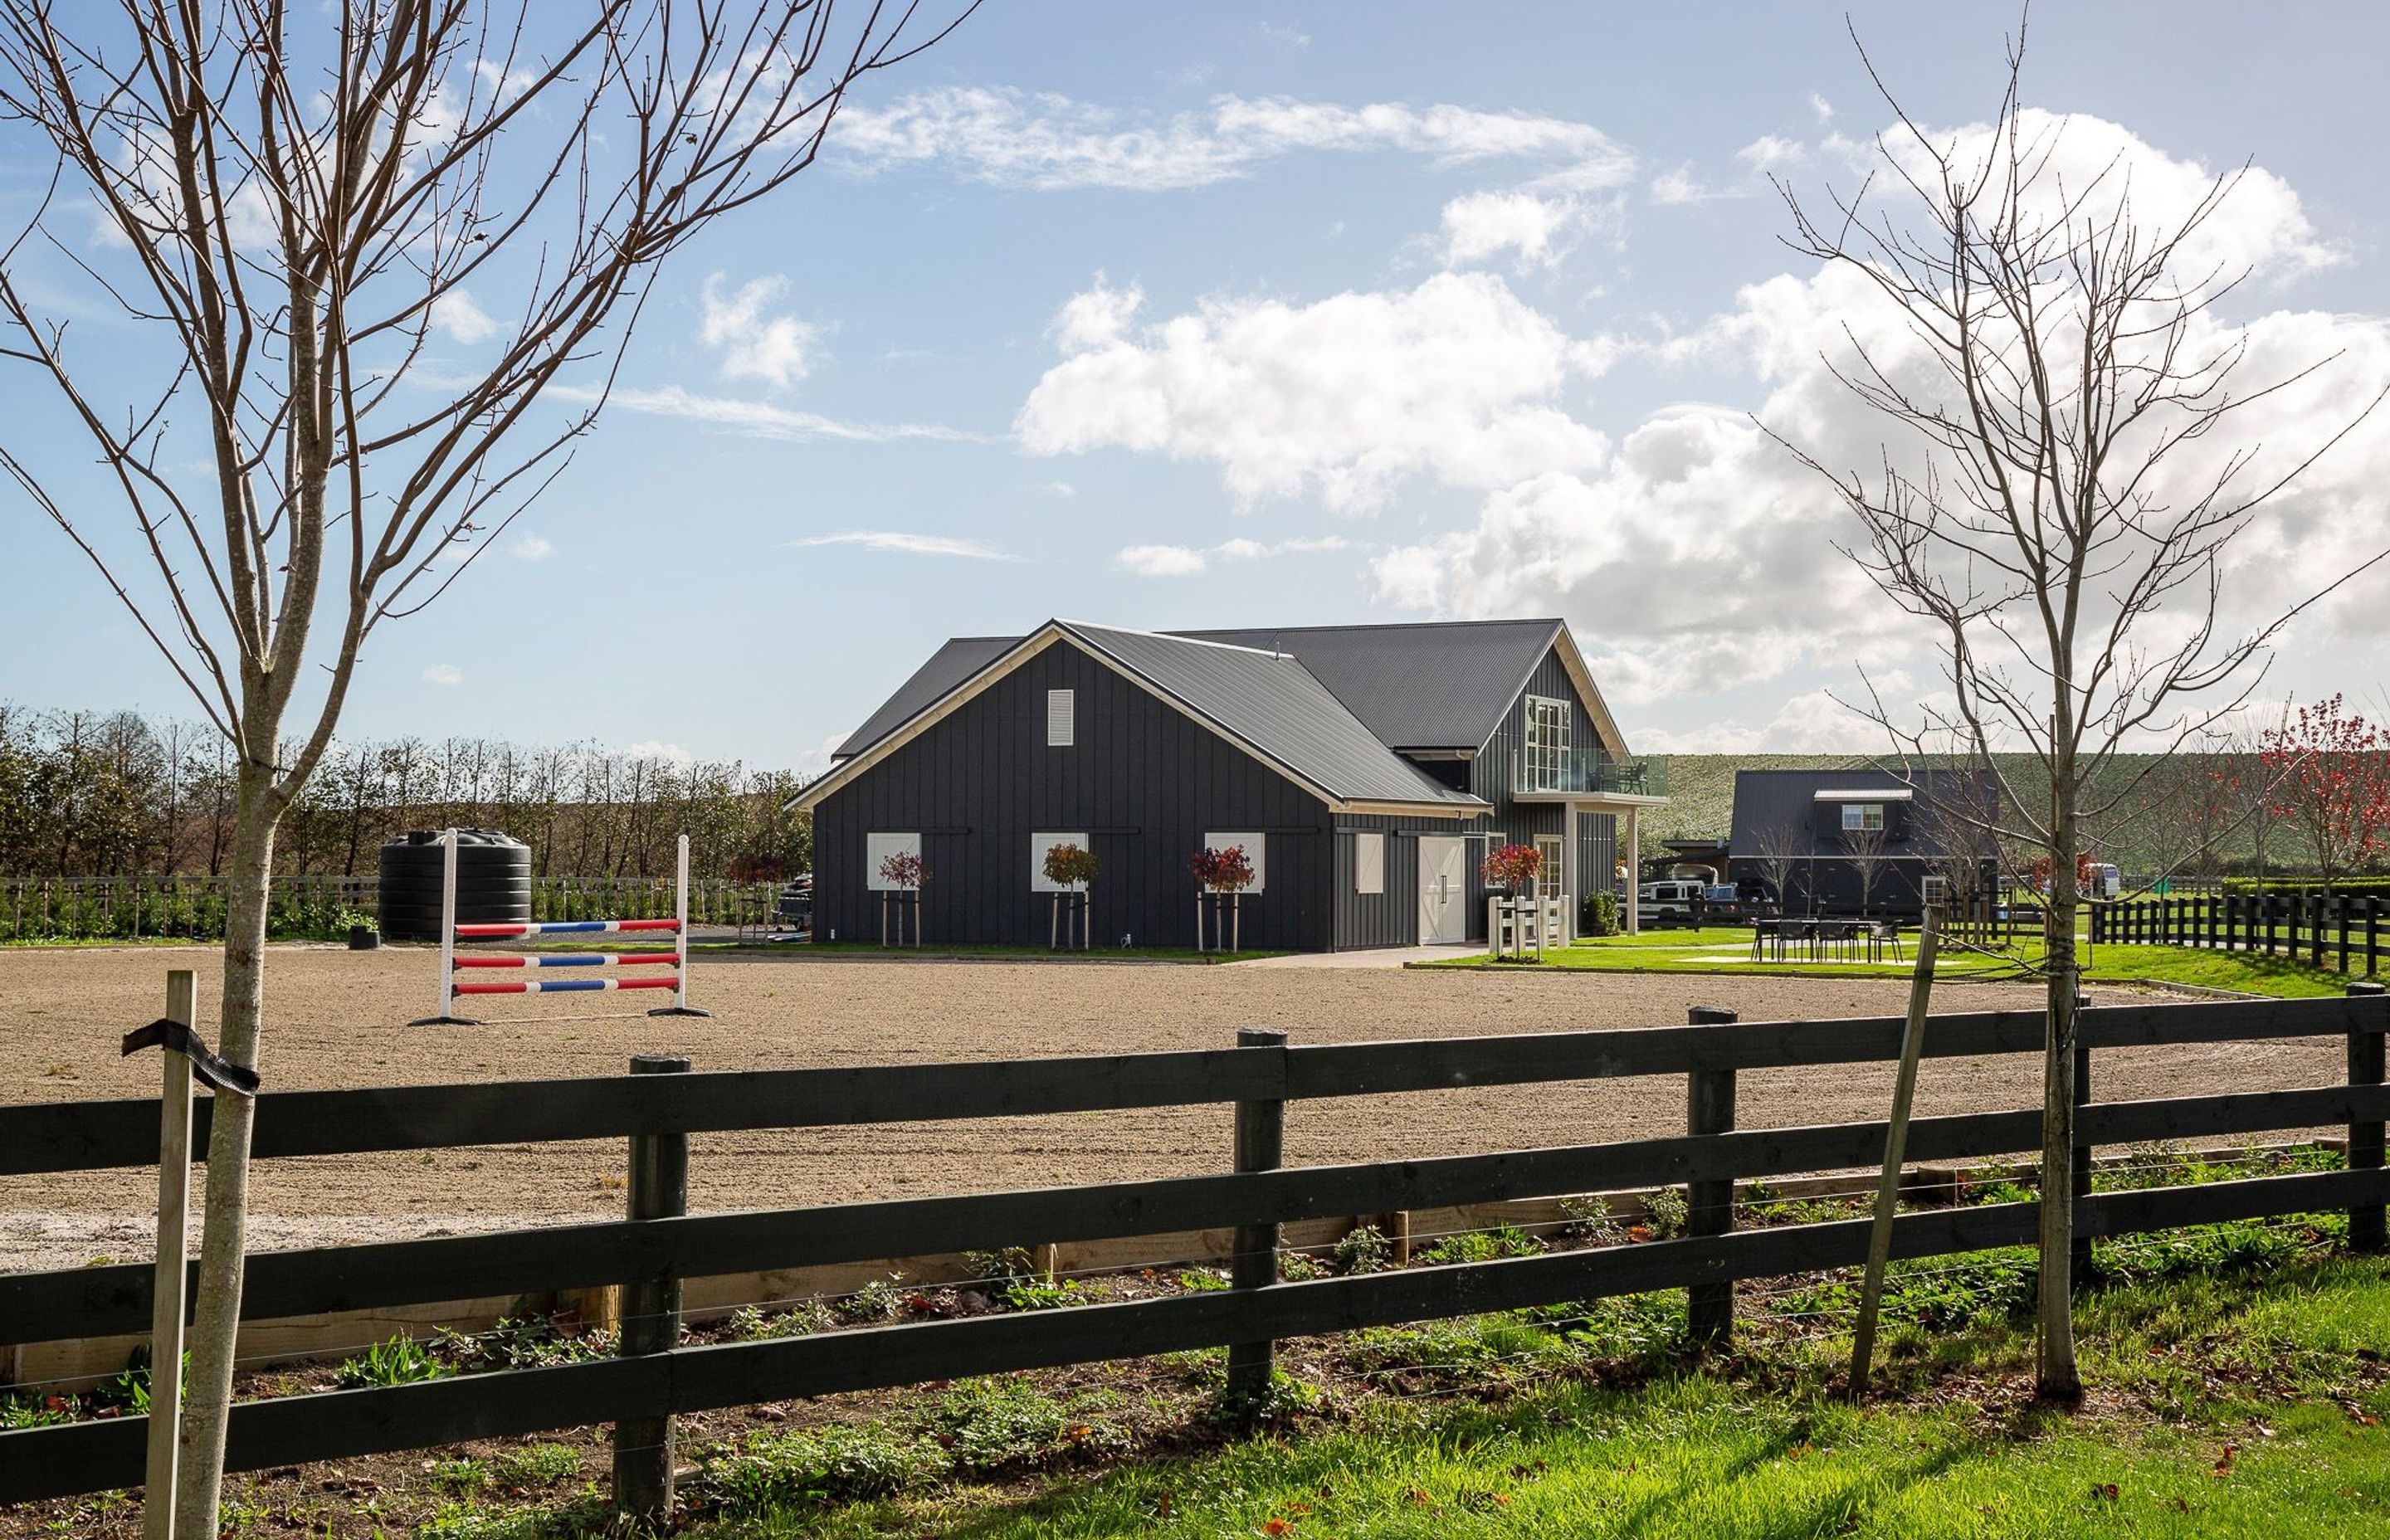 Set within a rural landscape within the Bombay Hills, south of Auckland, the barn is linked to a sand and shell horse arena.